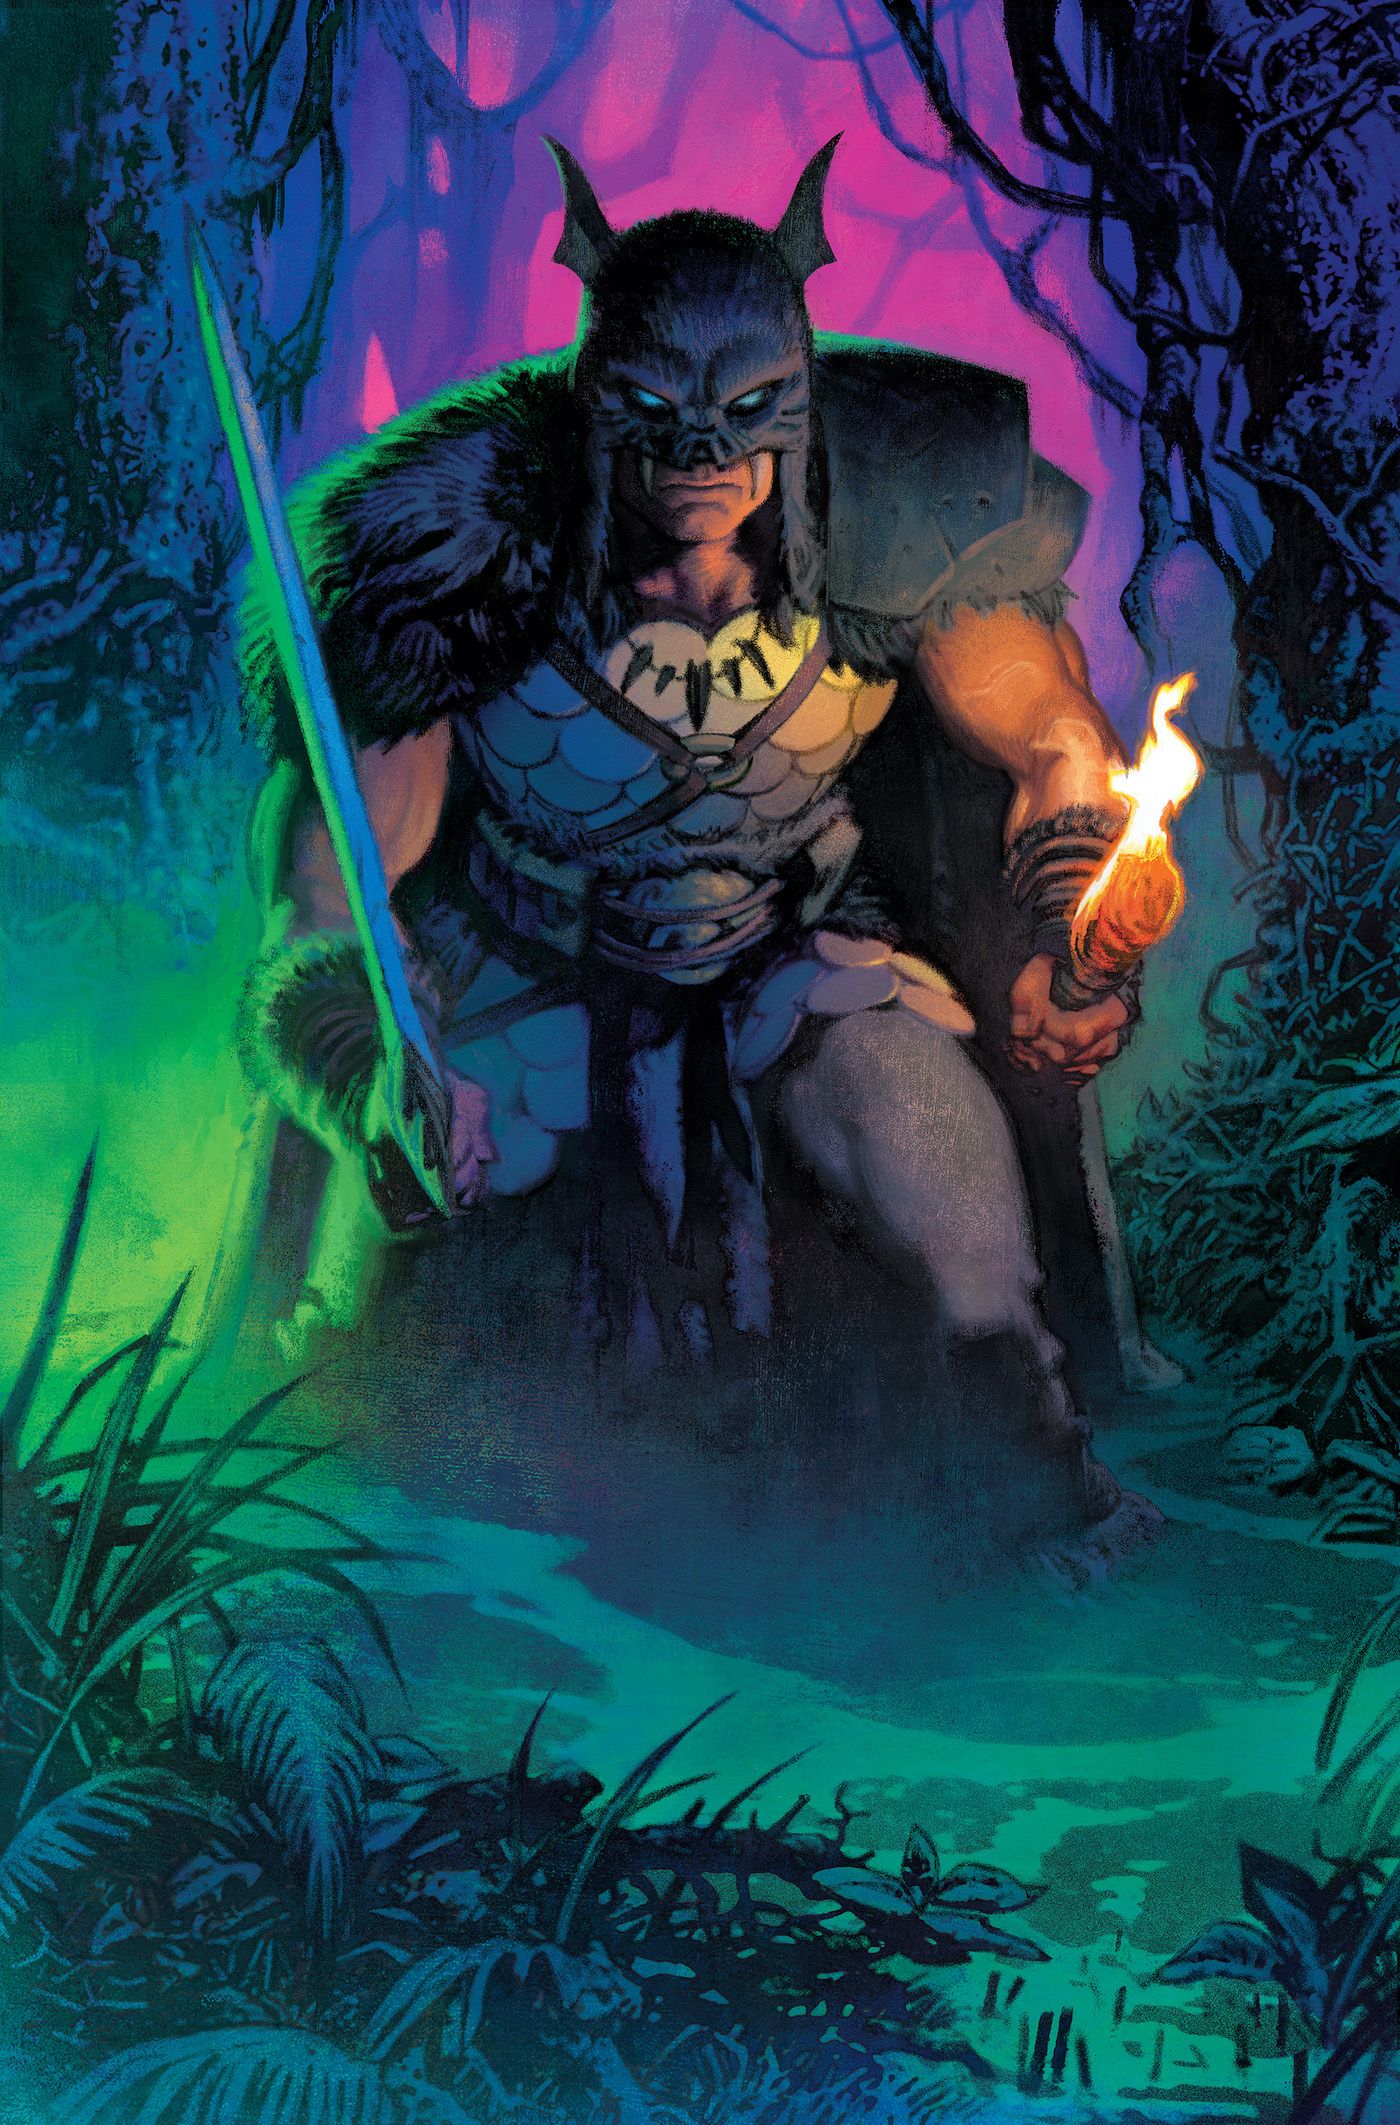 “Batman the Barbarian”: The Elseworlds Line Officially Returns to DC Comics with Jaw-Dropping New Series